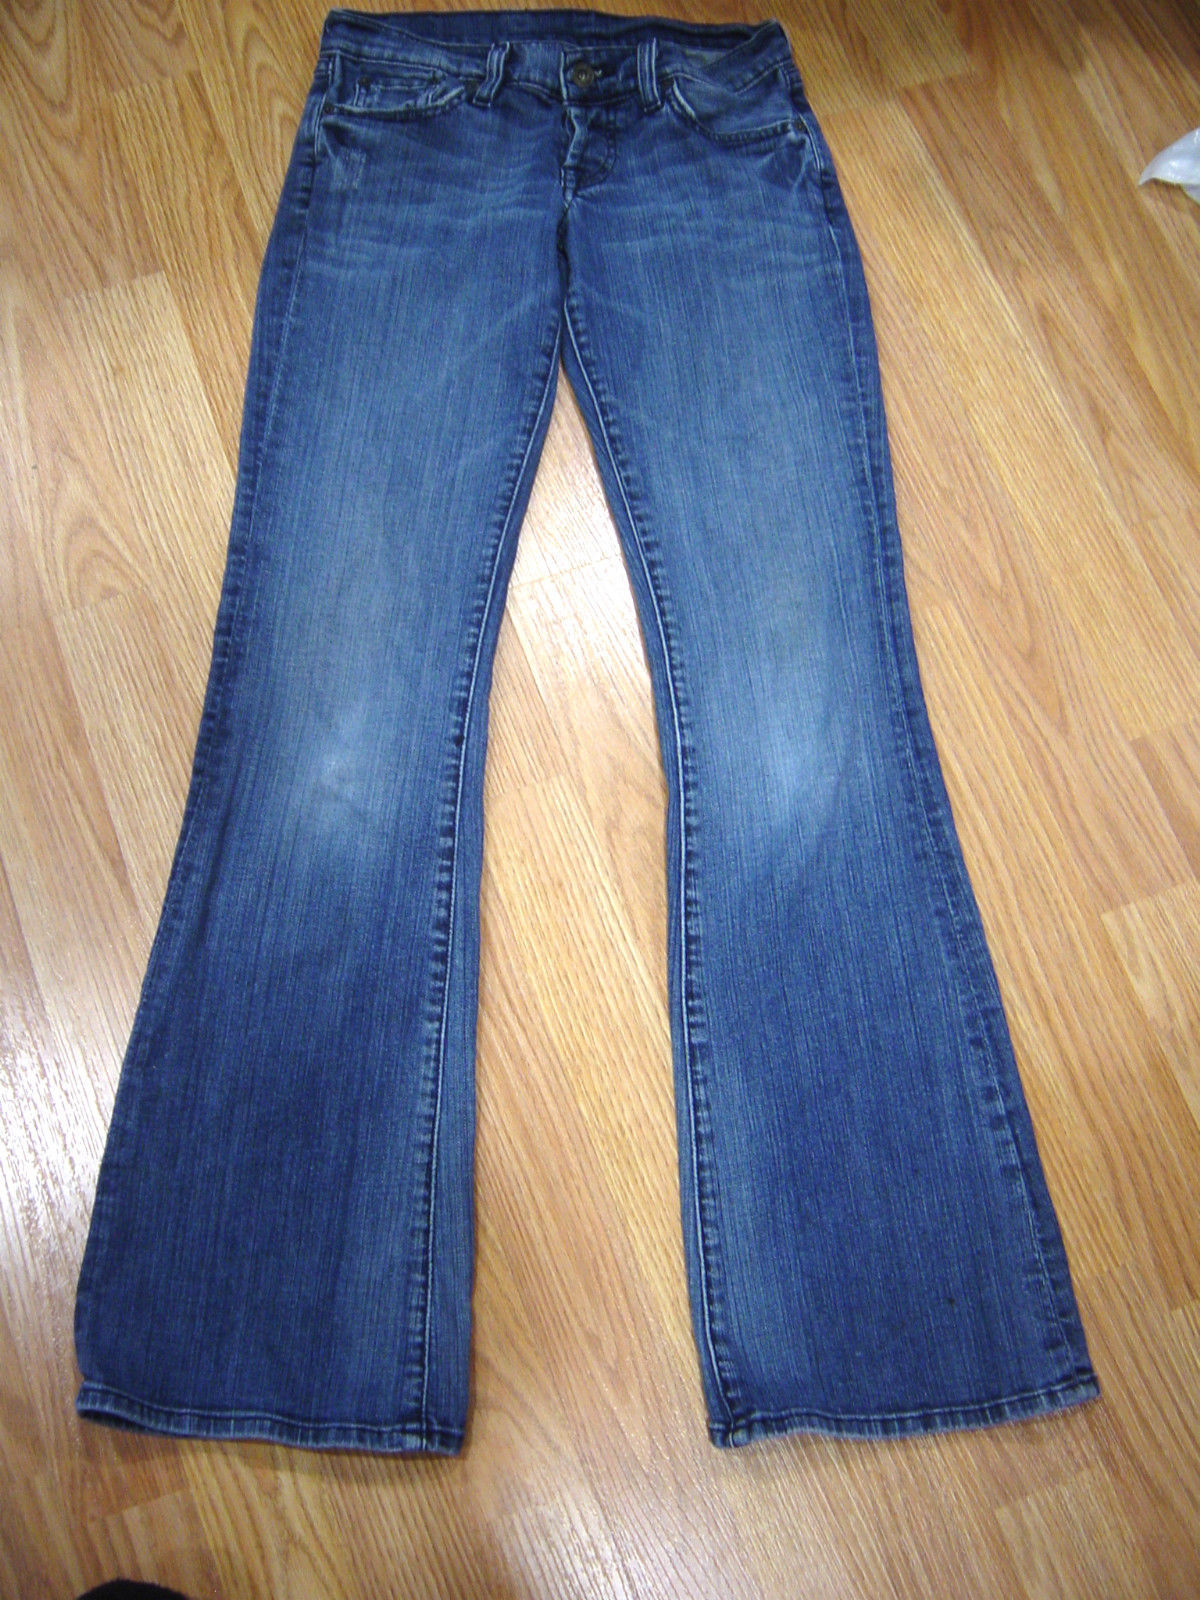 lucky brand button fly jeans